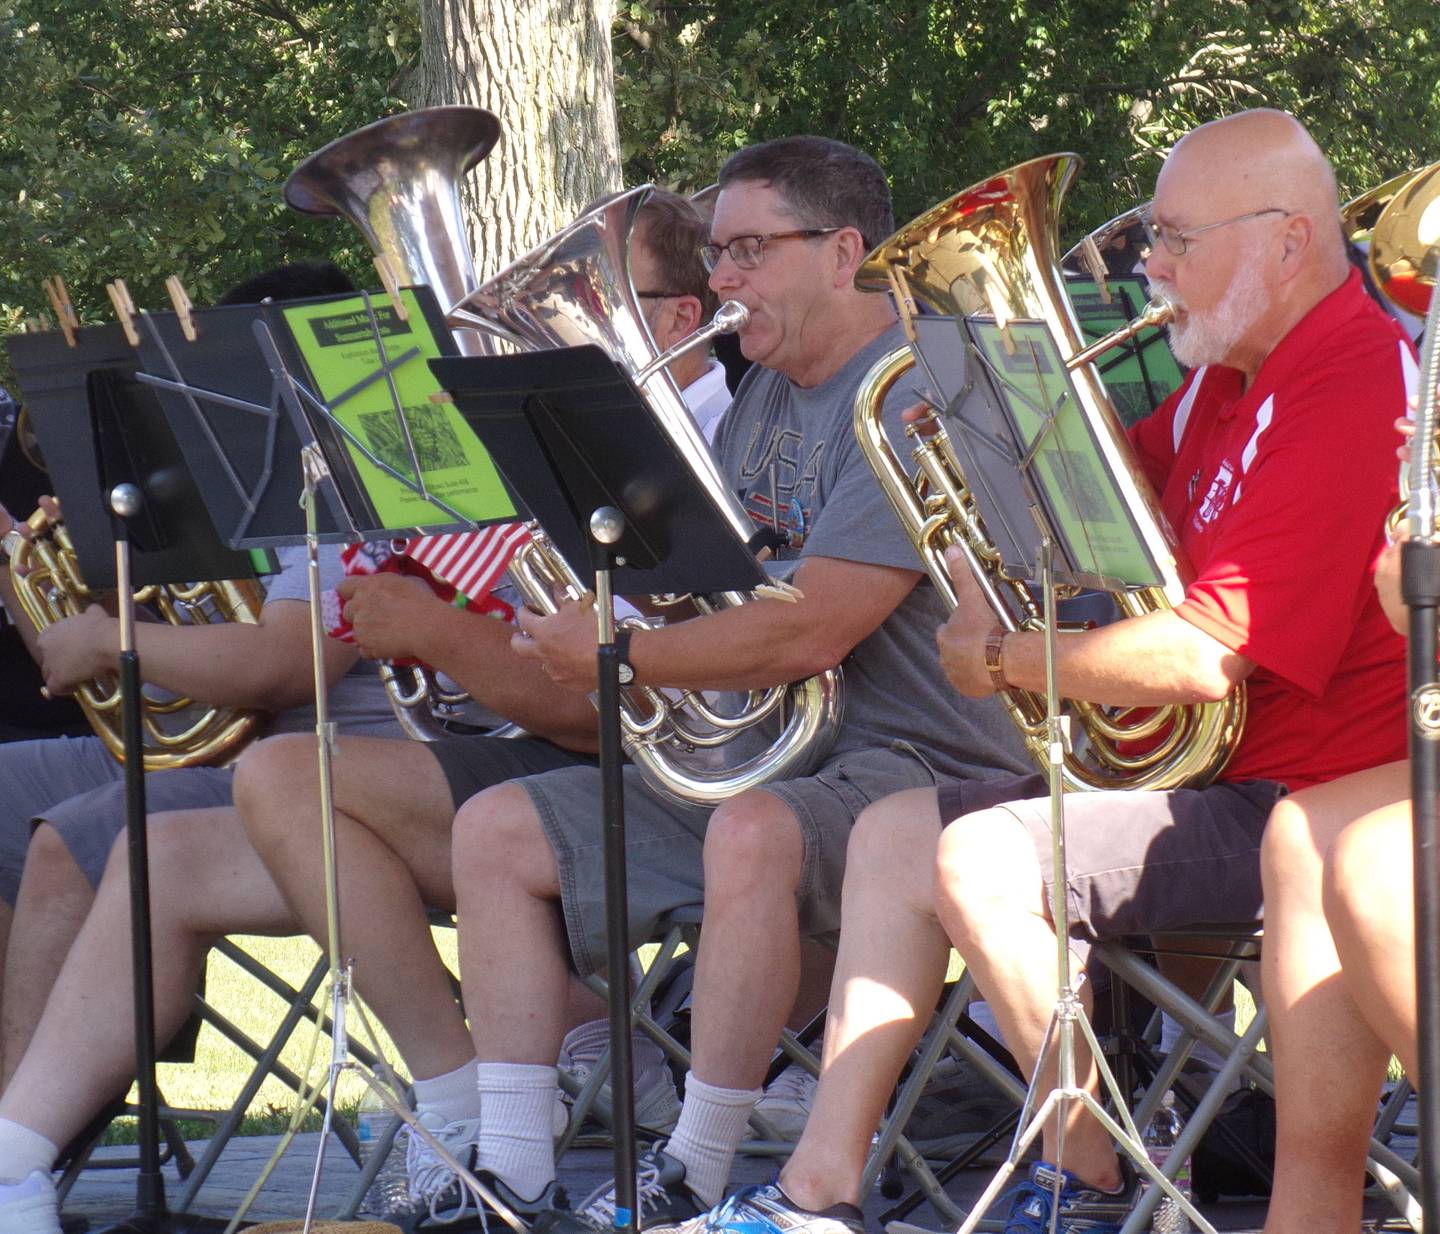 Tuba players performed a concert Sunday, July 31, 2022, at Centennial Park in Peru. SUMMERTUBAFEST was created by Tuba Christmas as part of the Harvey Phillips Foundation, which originated in 1974 by creator and renowned tubist Harvey Phillips of Indiana University and is presented with permission from the Harvey Phillips Foundation.